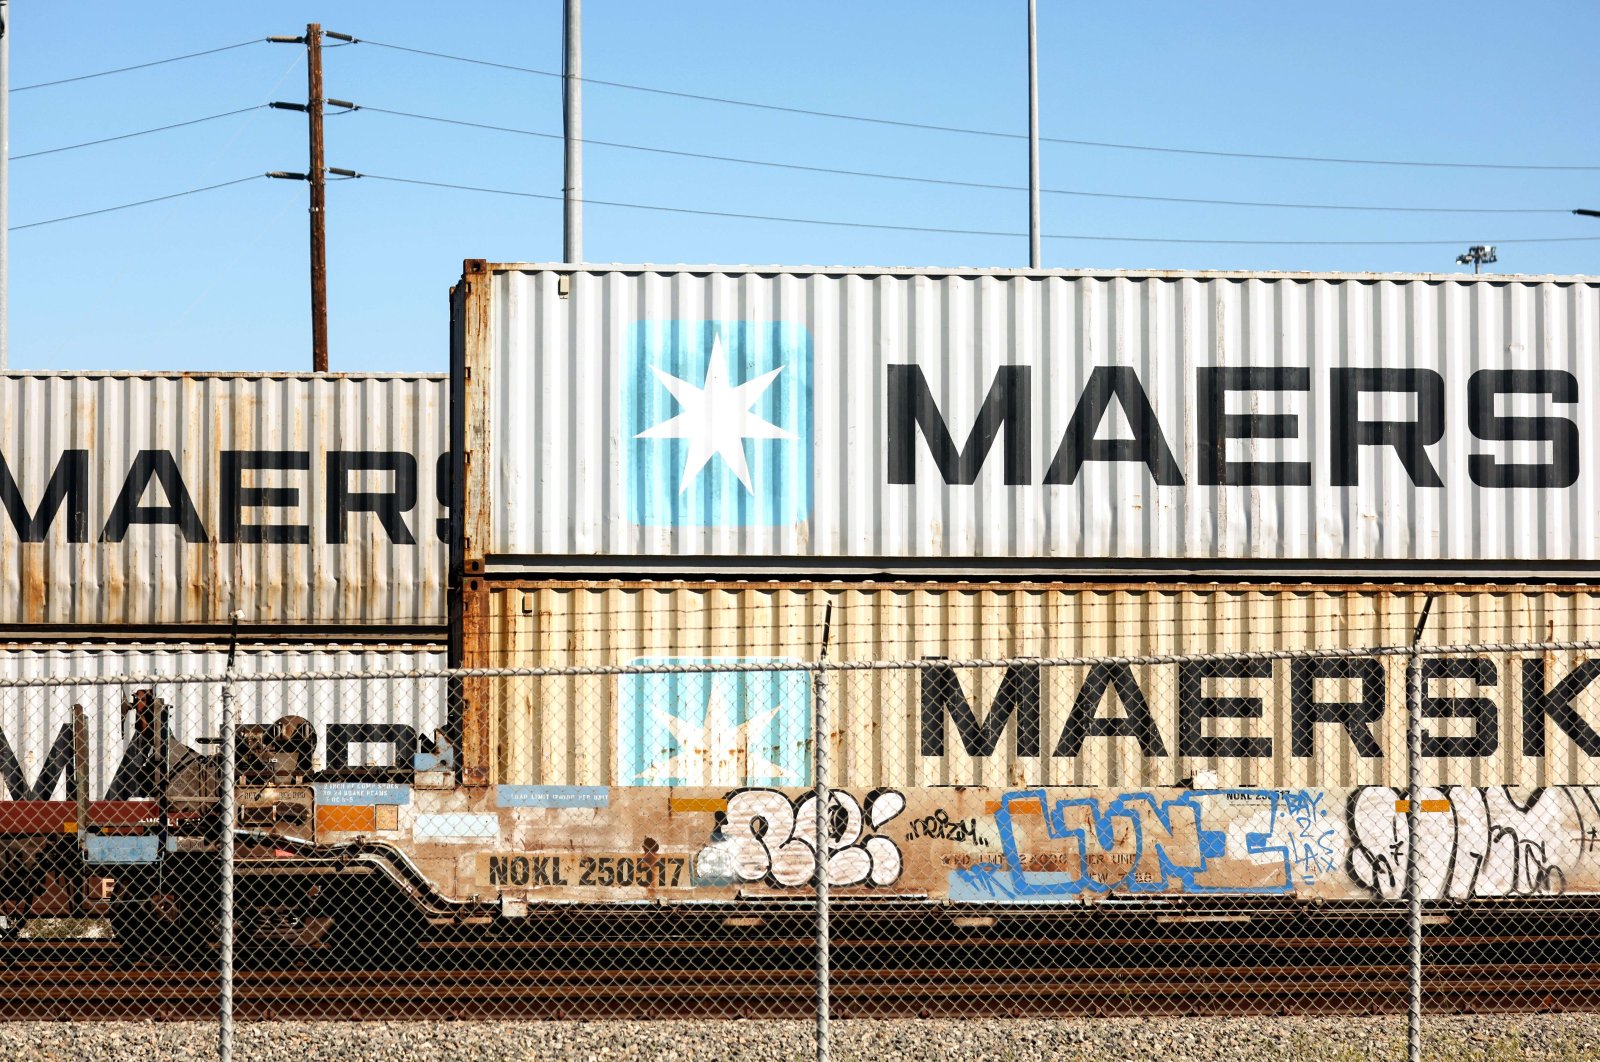 Maersk shipping containers sit on rail cars at the Port of Los Angeles, California, U.S., Feb. 9, 2022. (AFP Photo)